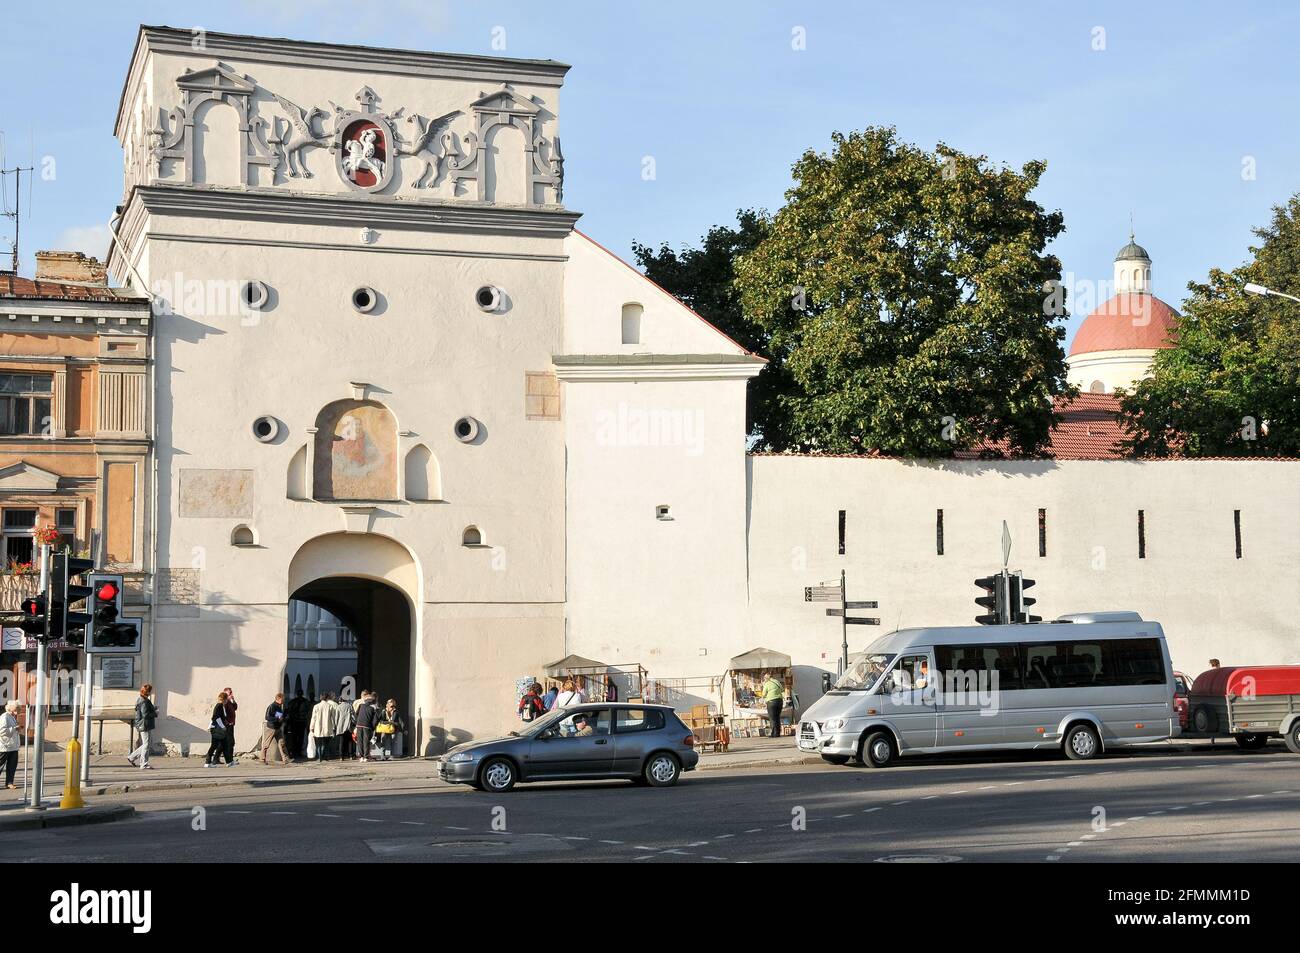 Aušros vartai (Gate of Dawn) or Ostra Brama in Polish with chapel of Our Lady of the Gate of Dawn with The icon of Our Lady of the Gate of Dawn (Matka Stock Photo